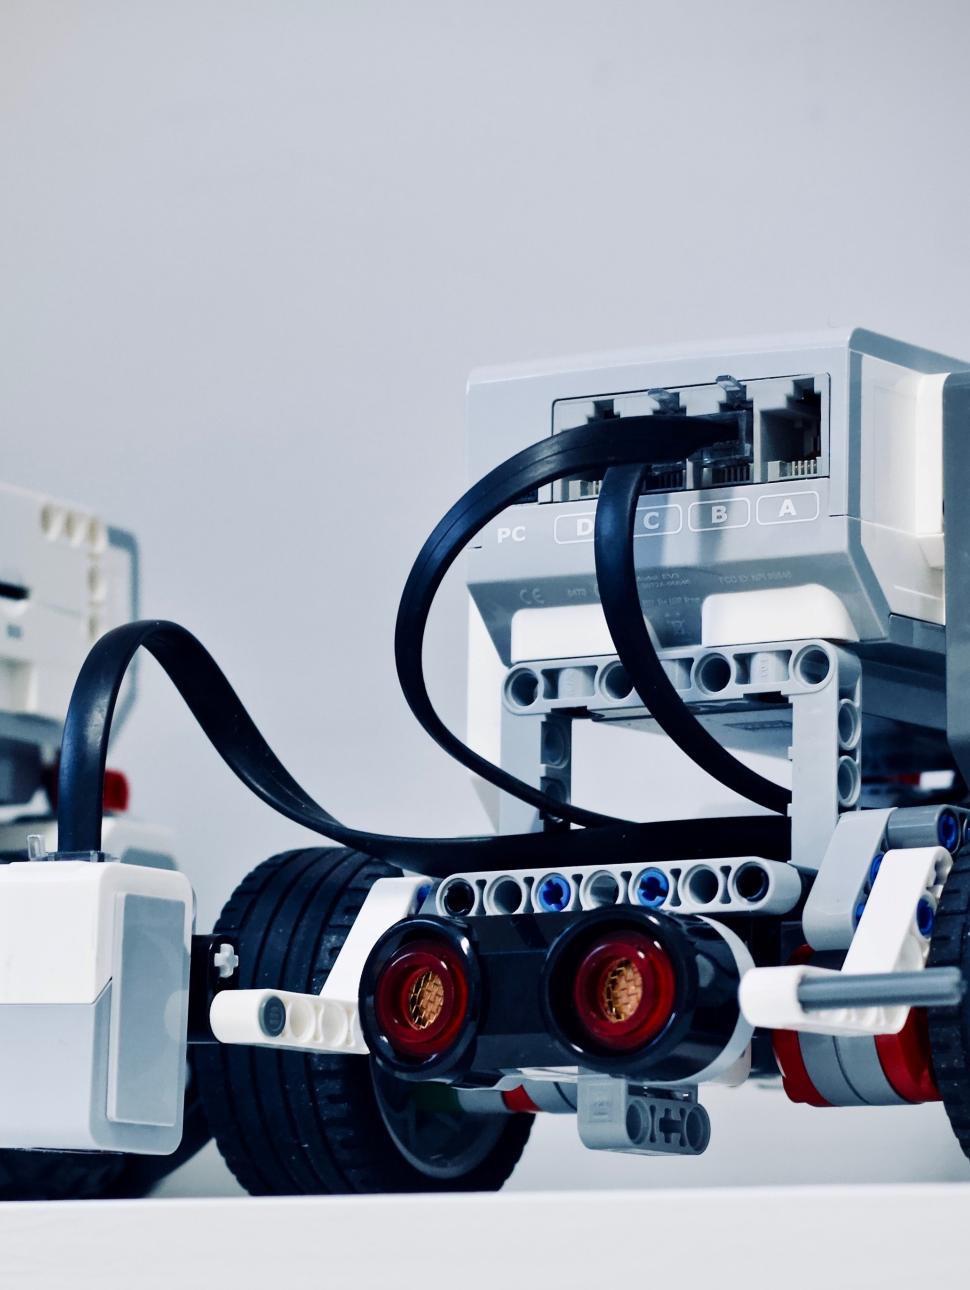 Image show a close up of two Lego Mindstorm robots